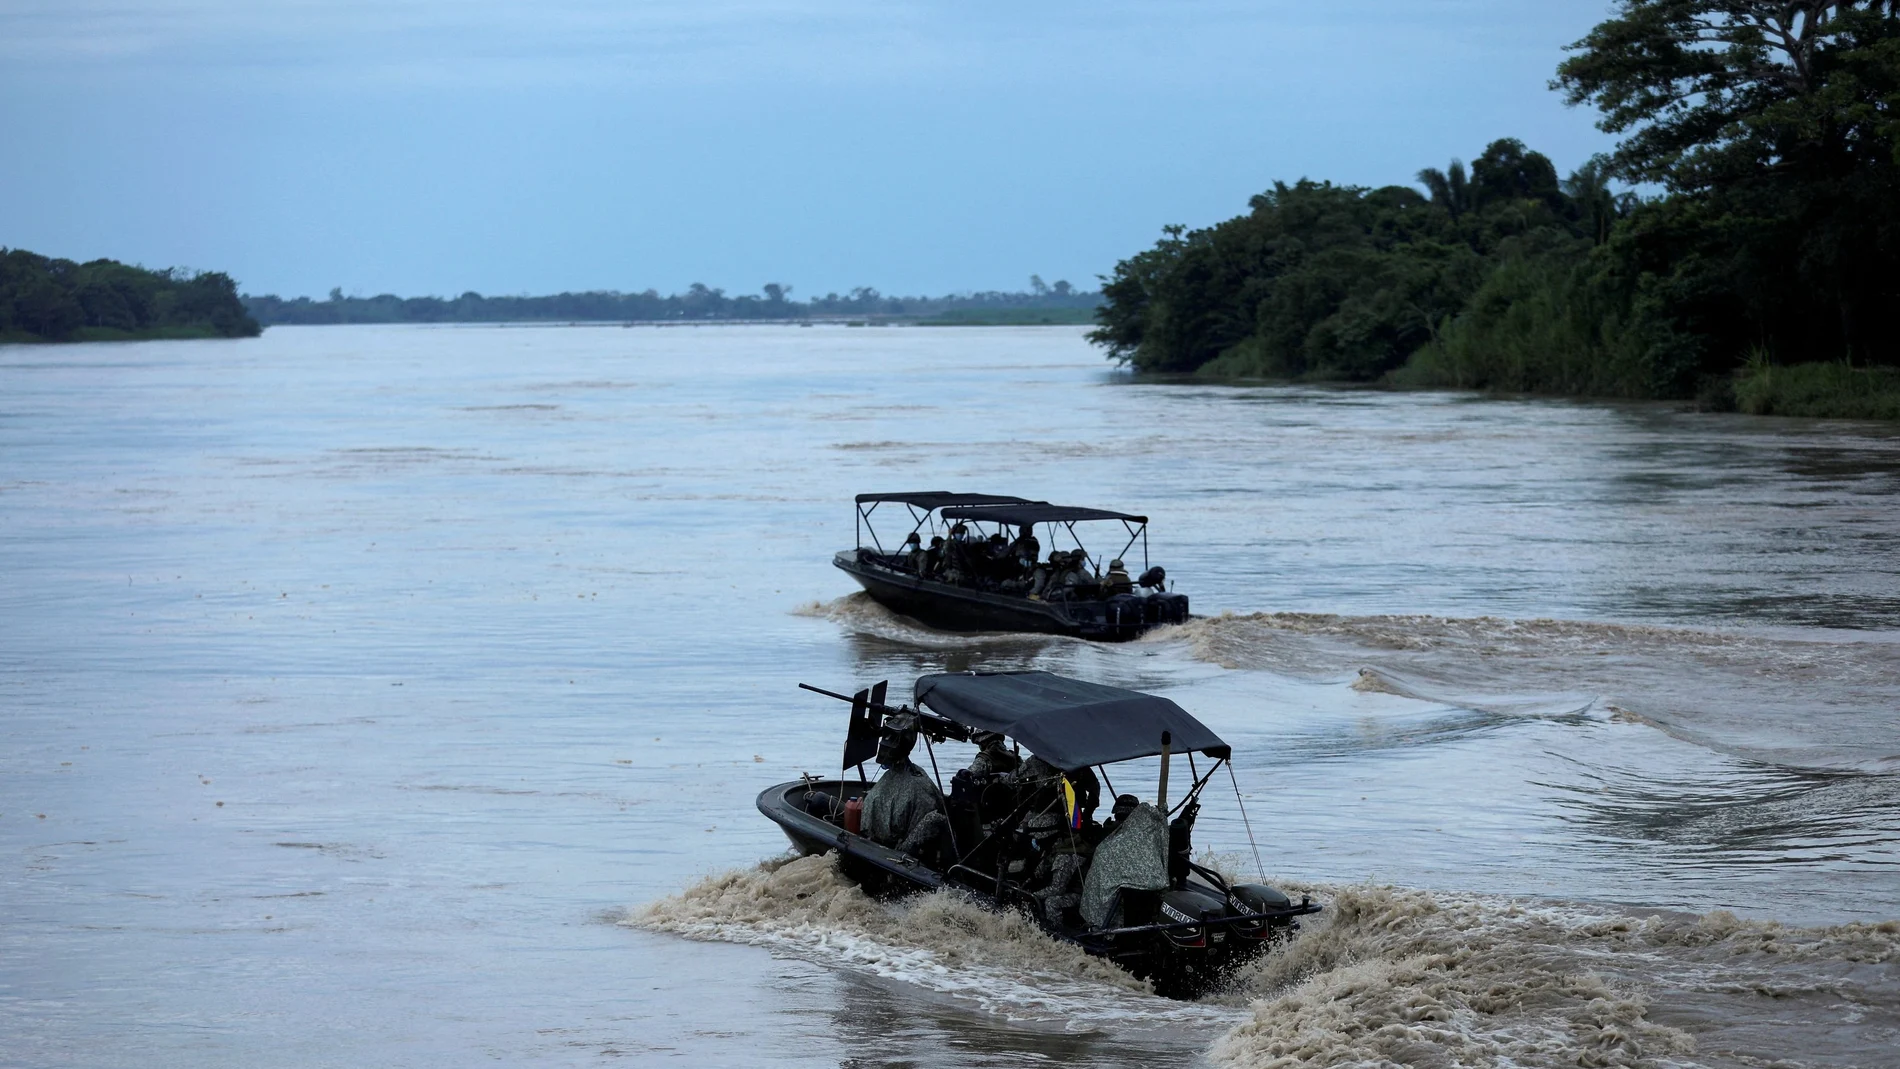 FILE PHOTO: Colombian soldiers patrol by boat on the Arauca River, at the border between Colombia and Venezuela, as seen from Arauquita, Colombia March 28, 2021. REUTERS/Luisa Gonzalez/File Photo